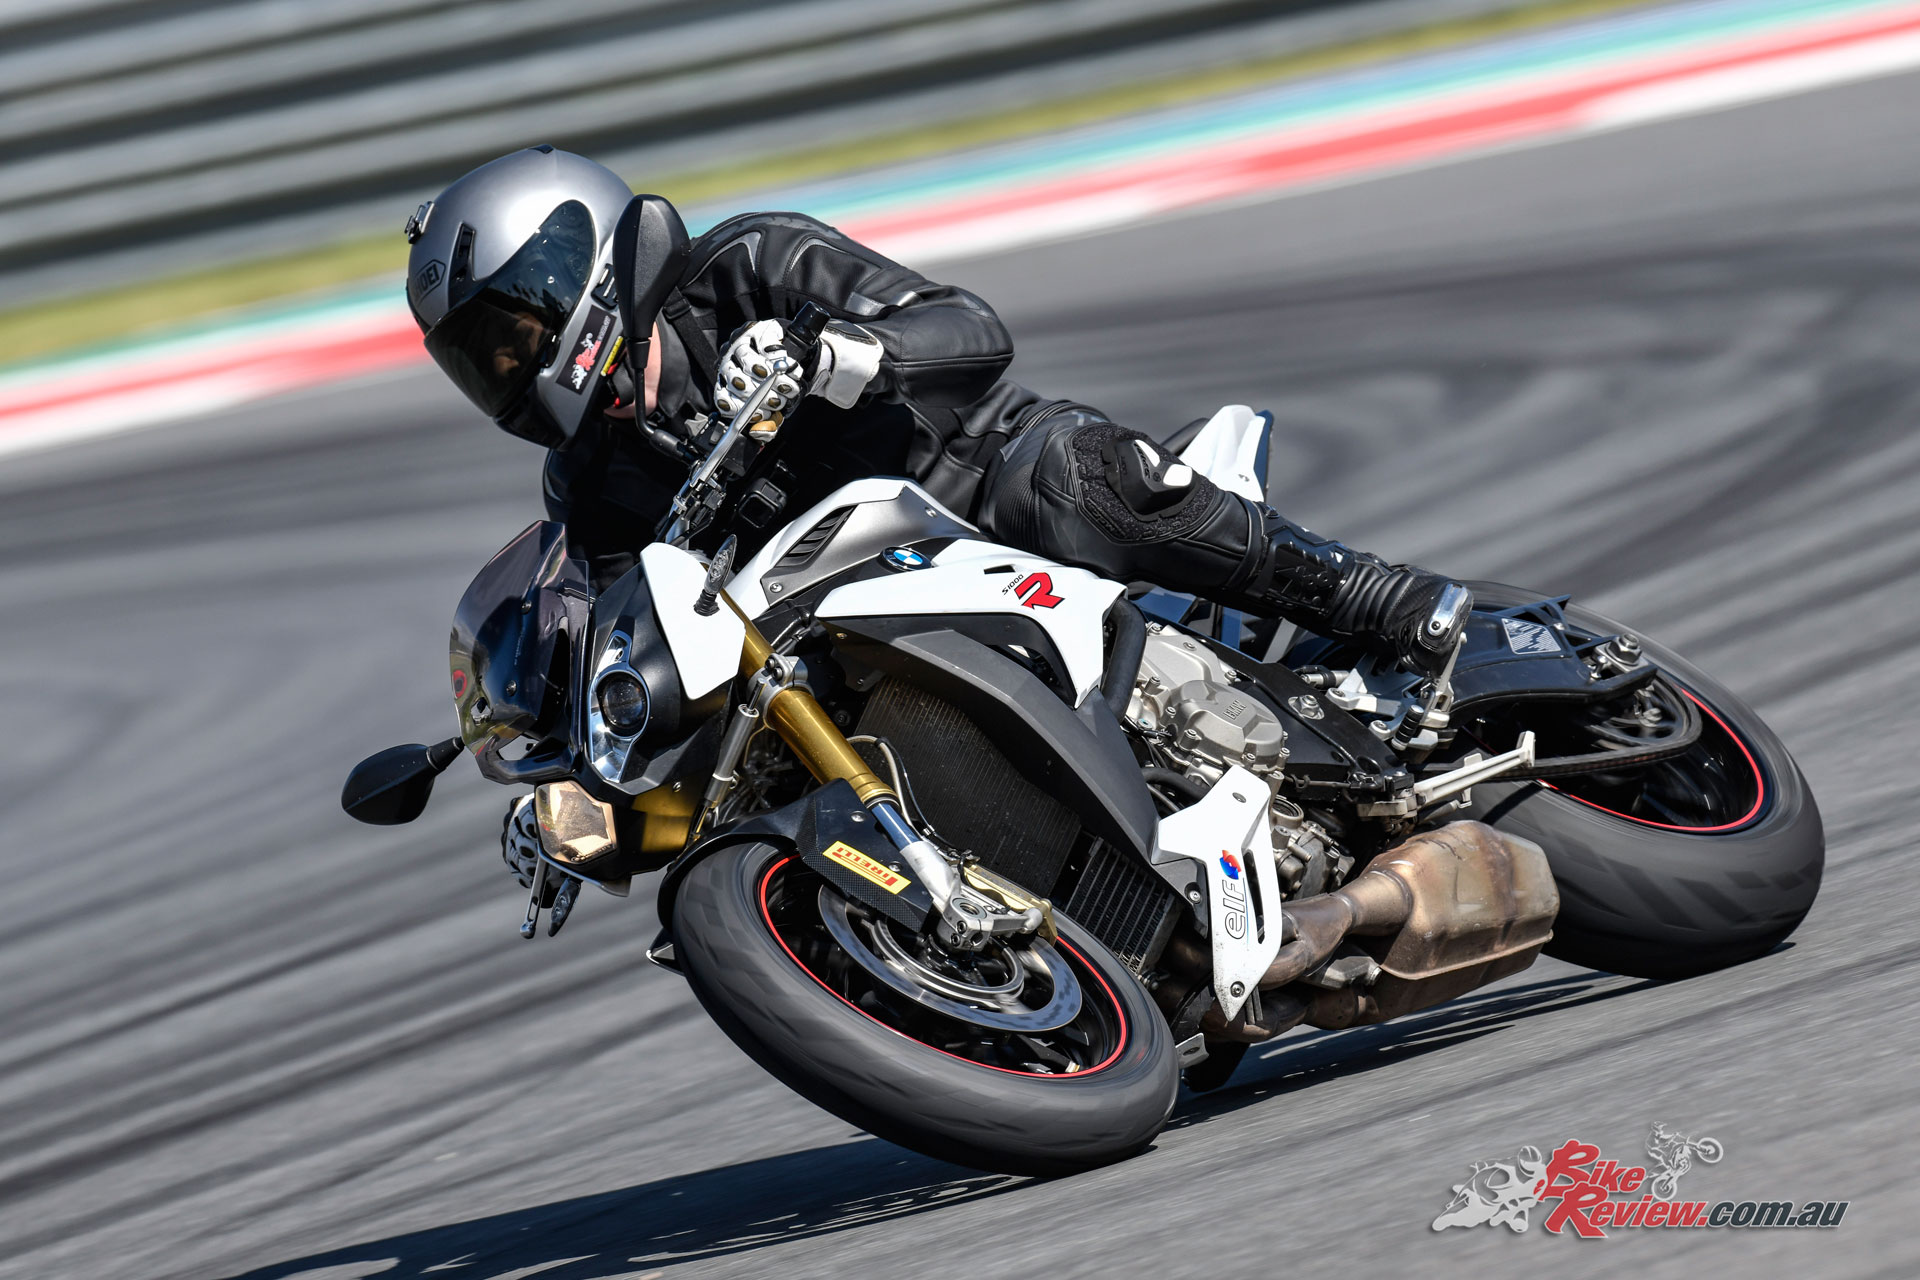 Testing out the Spidi Back Warrior Evo at the Pirelli Diablo Rosso Corsa II launch in South Africa